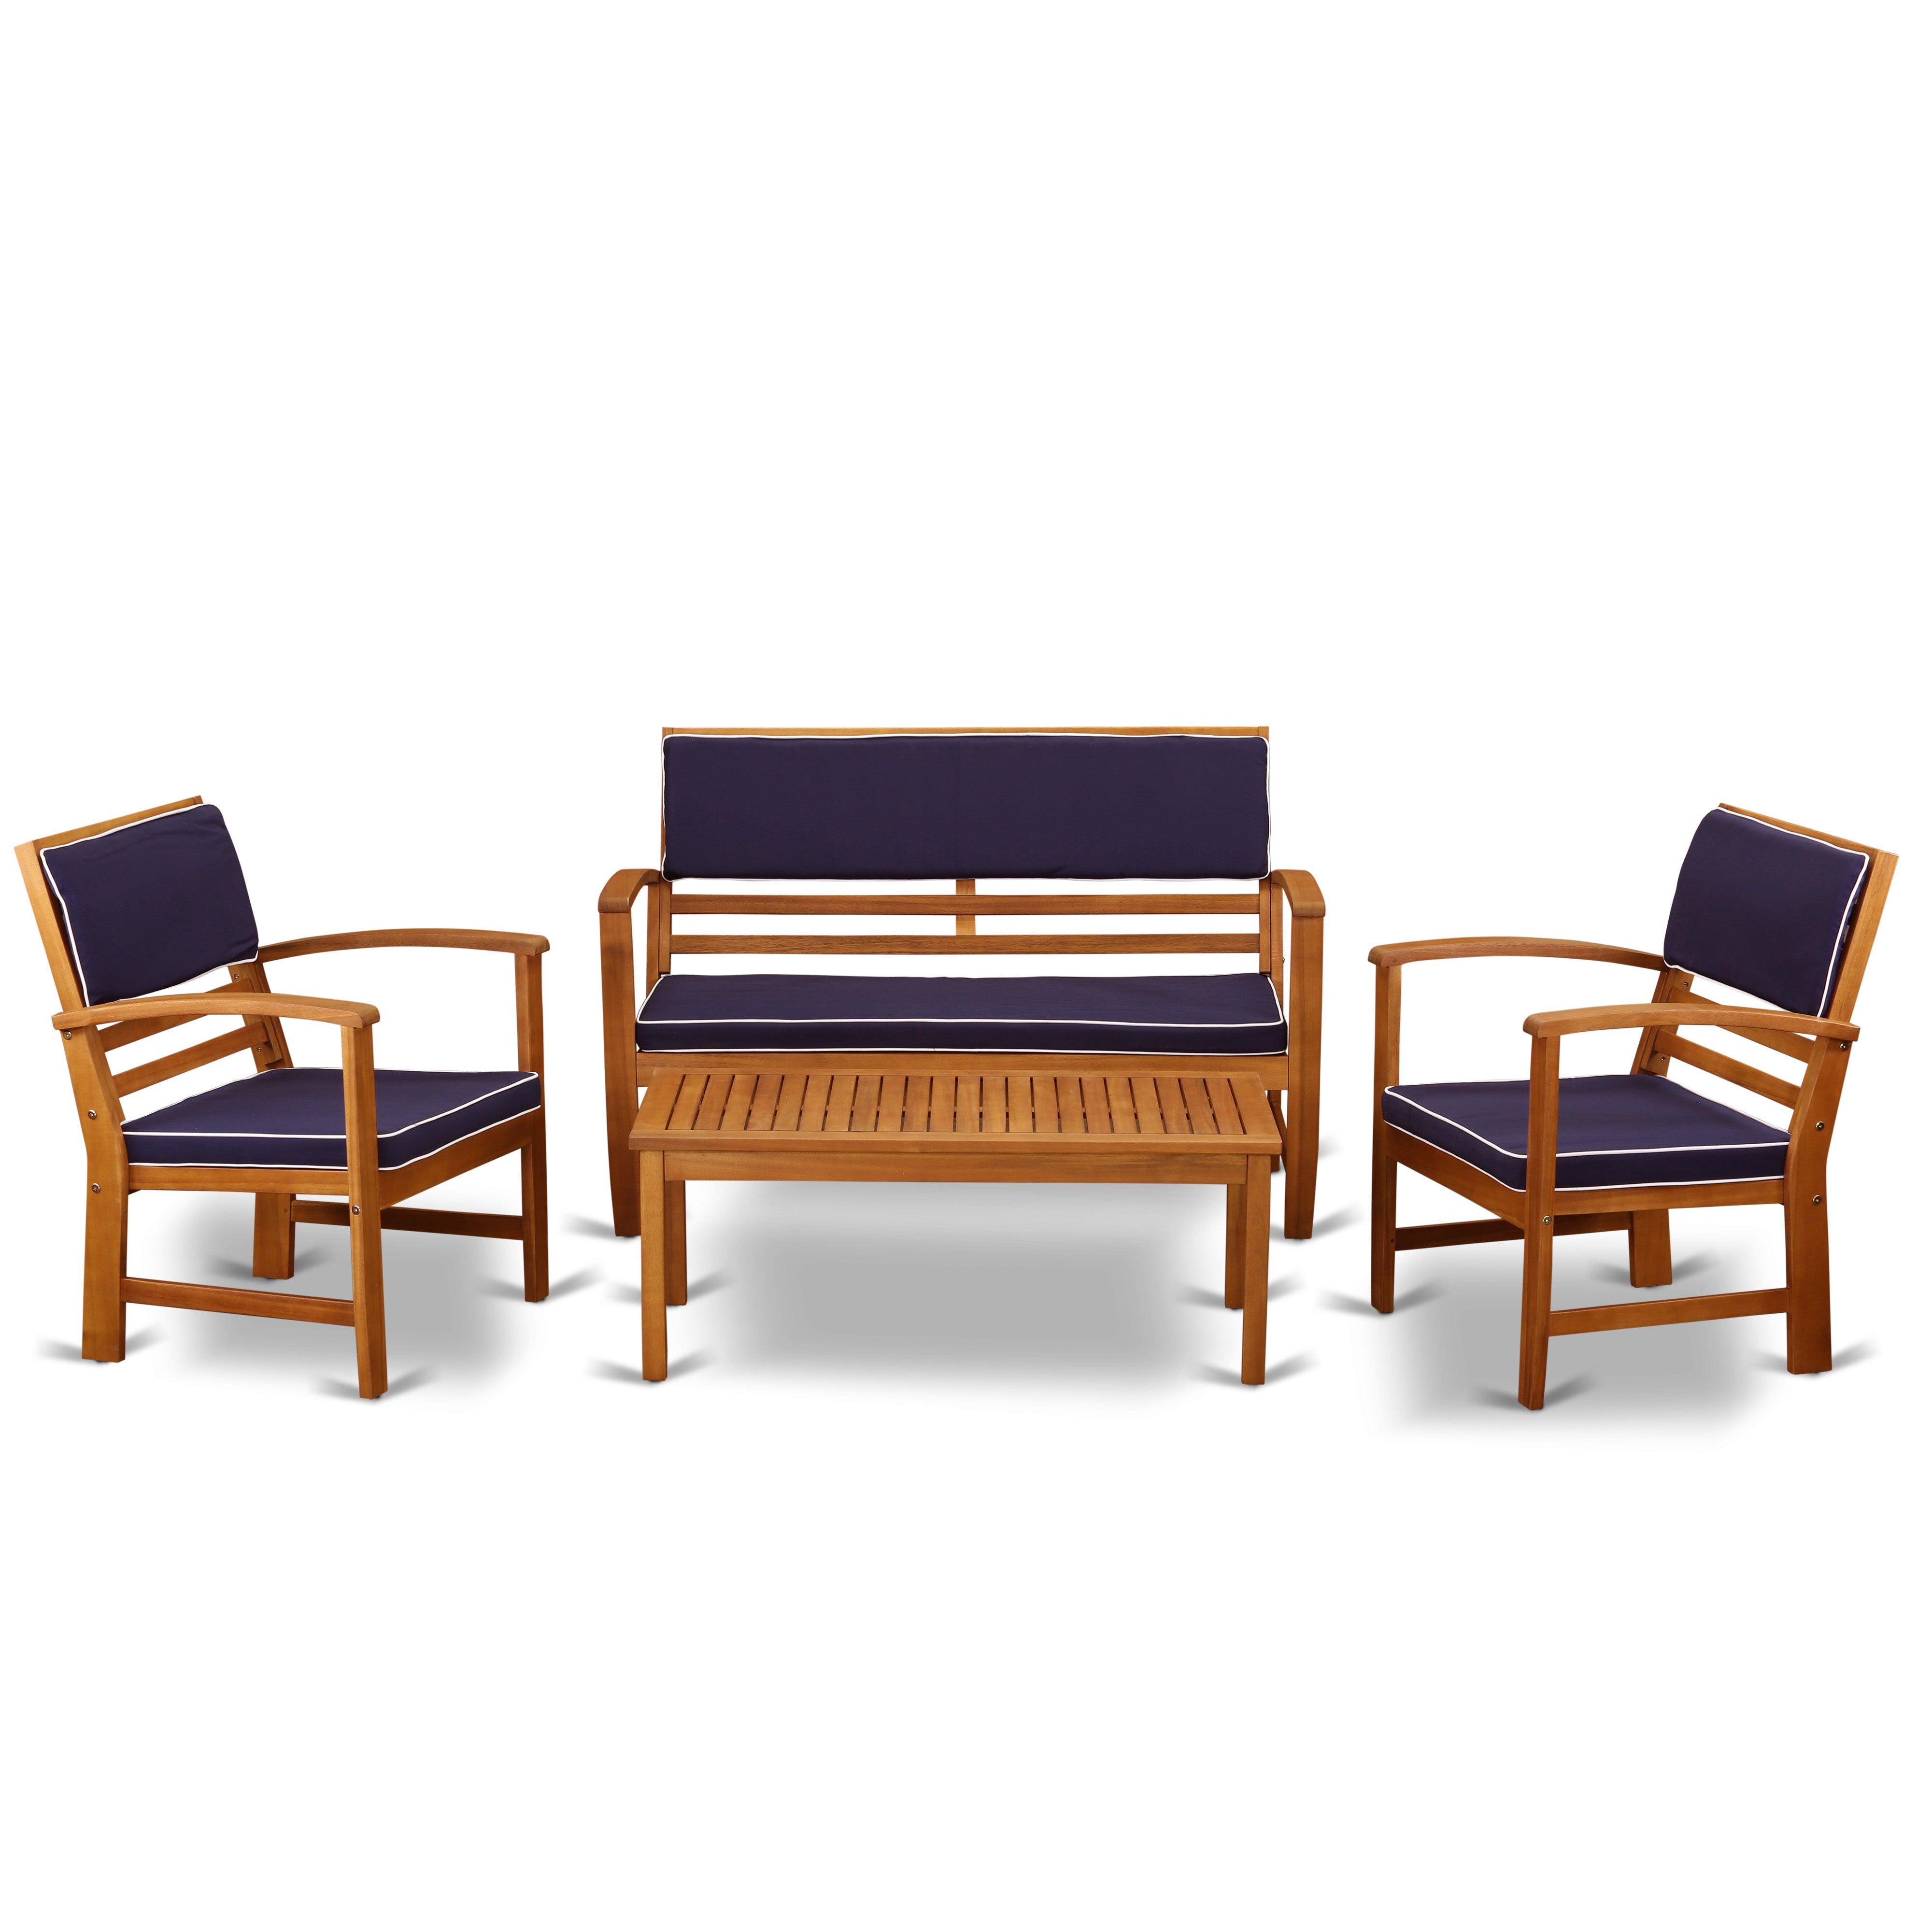 Coppell 4-piece Wood Patio Dining Set in Natural Oil